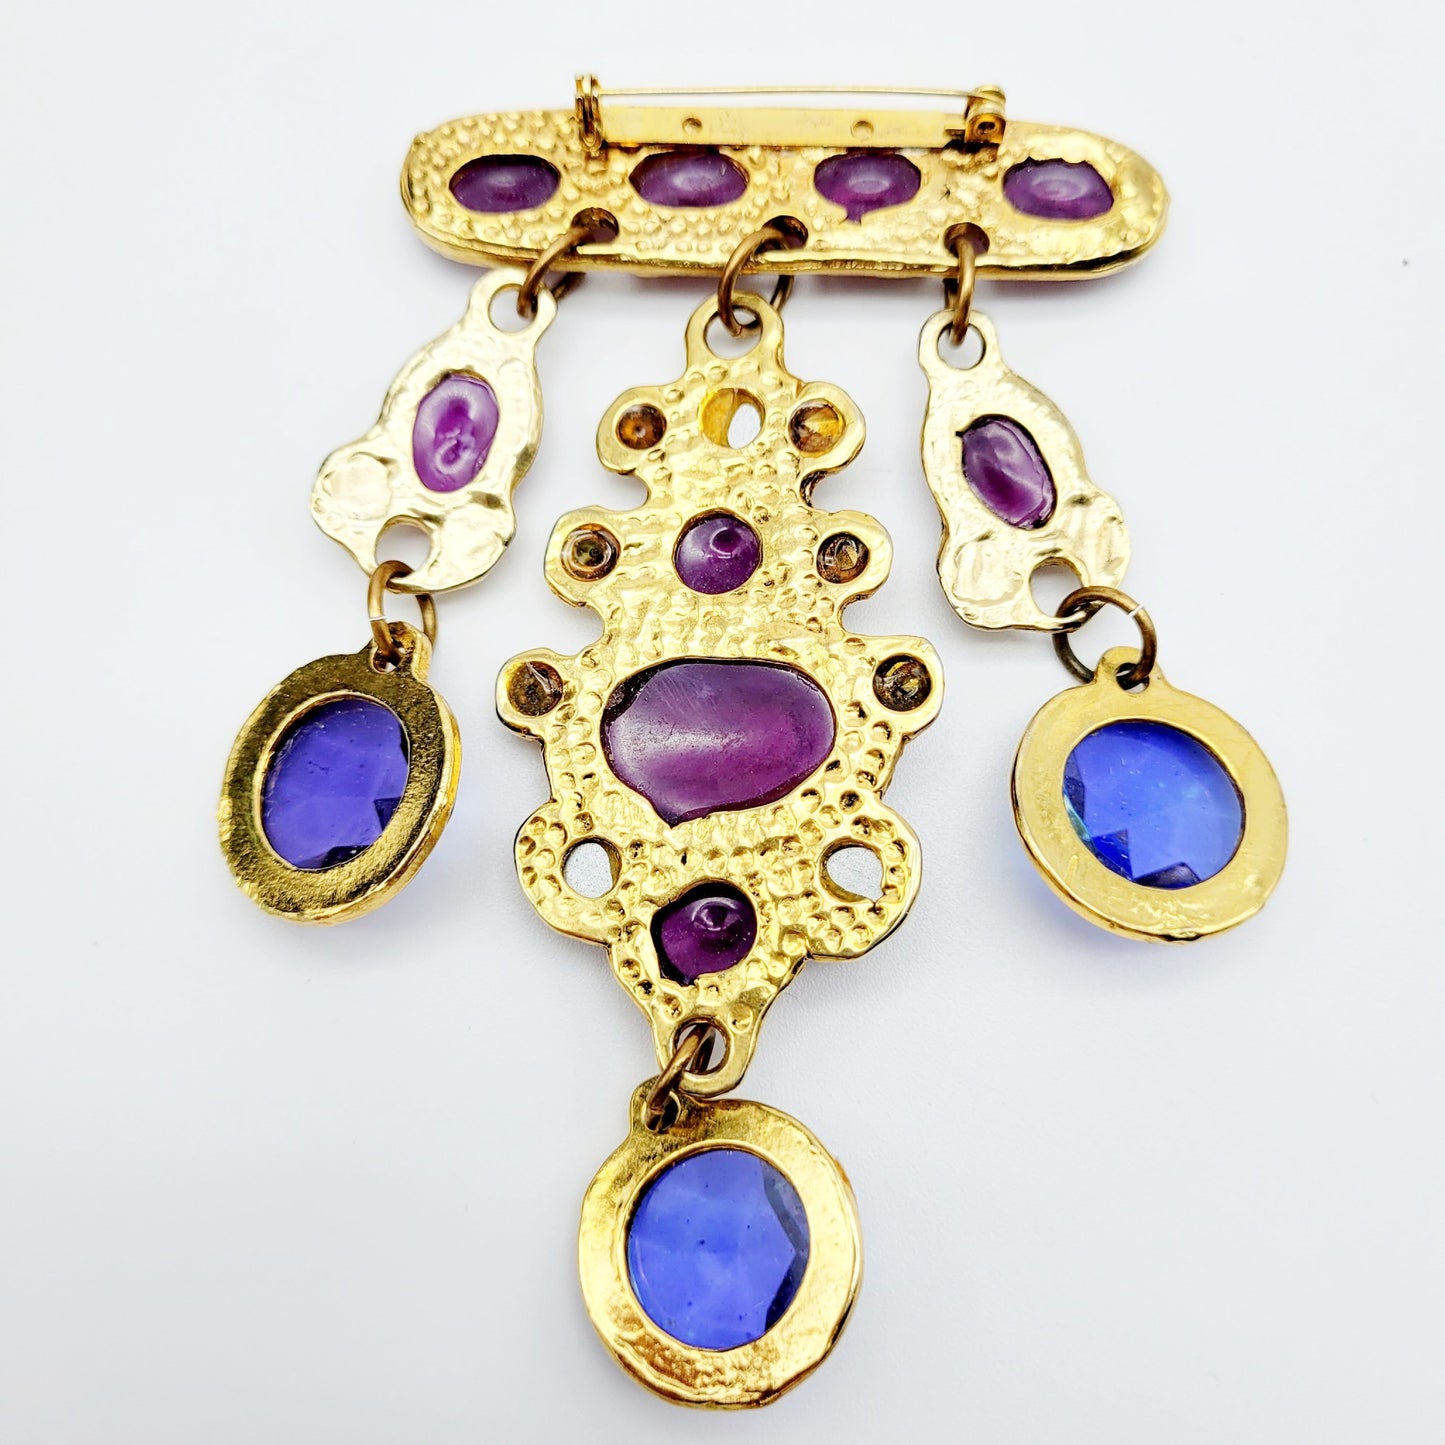 Vintage French Brooch